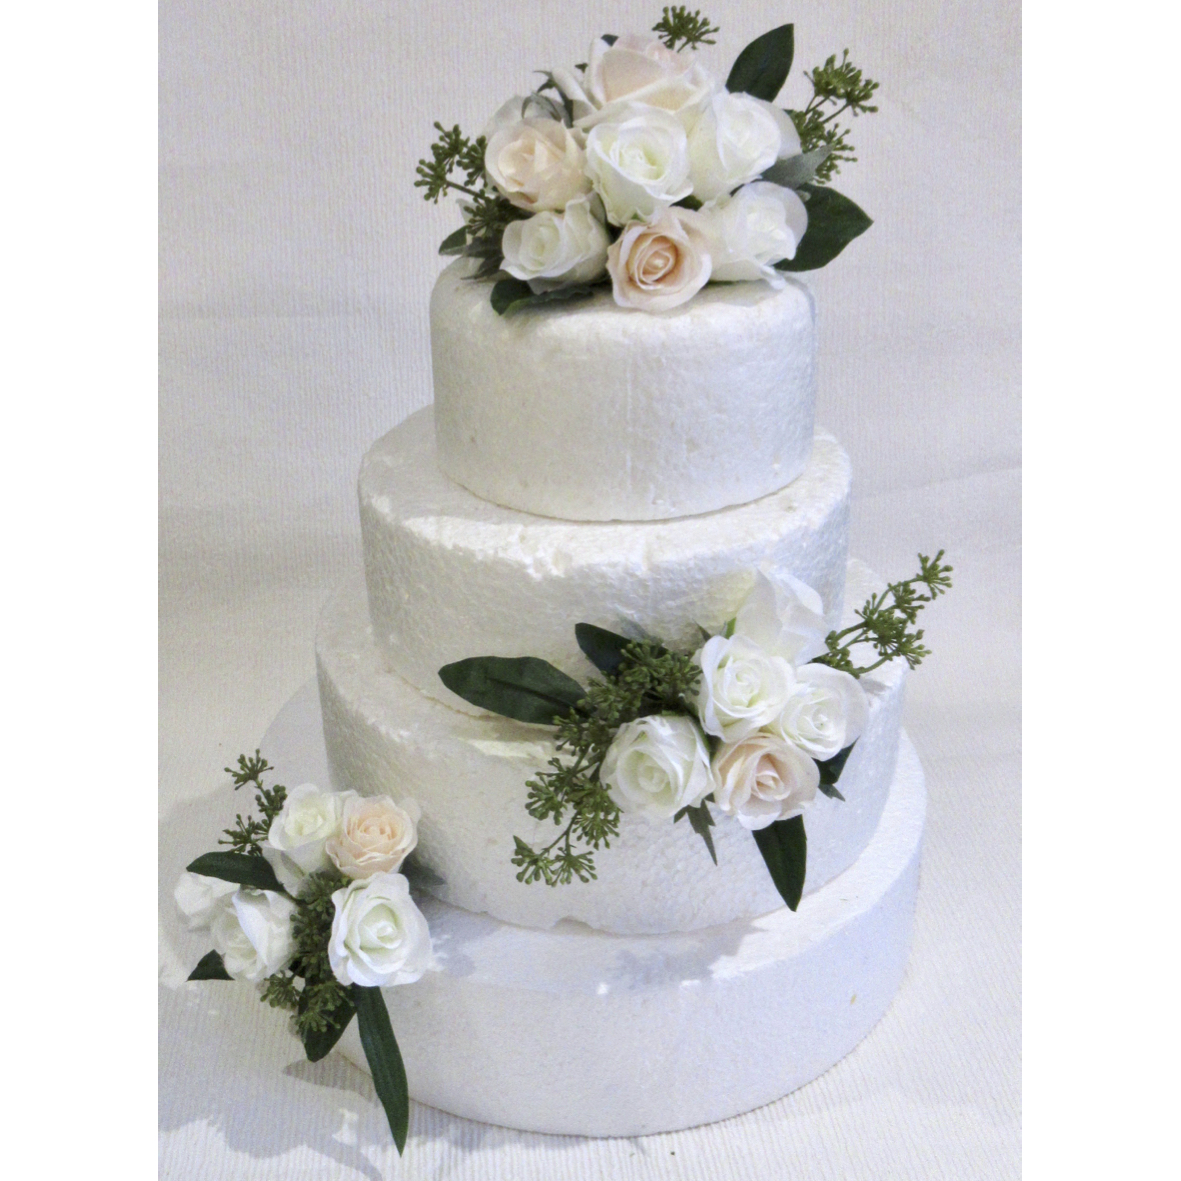 Blush and Ivory Cake Flowers for weddings